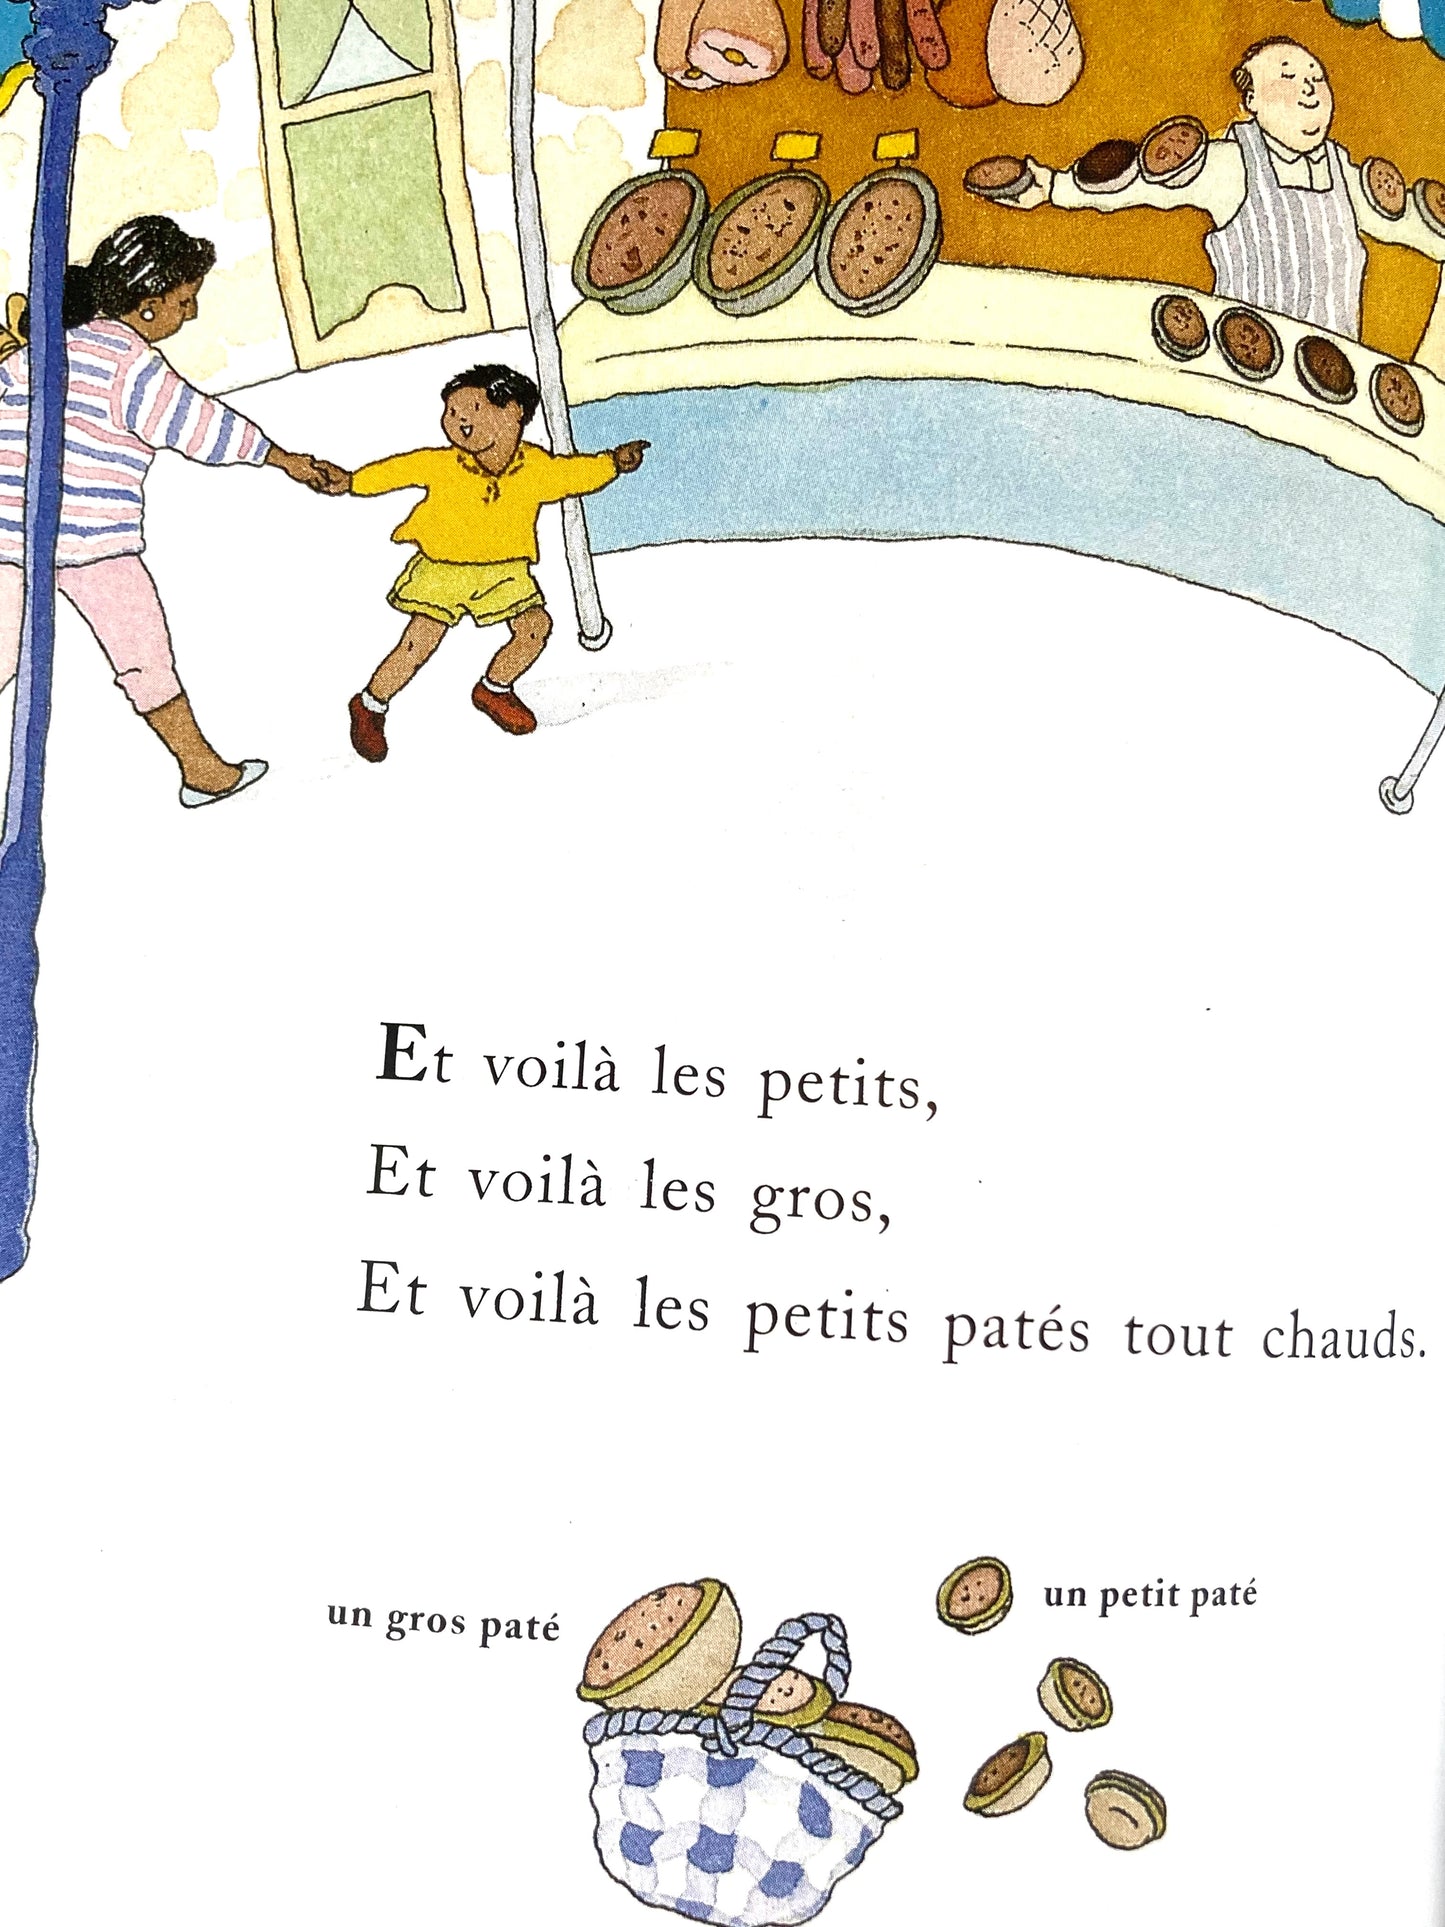 Children's Picture Book - "UN DEUX TROIS", Nursery Rhymes...in French!